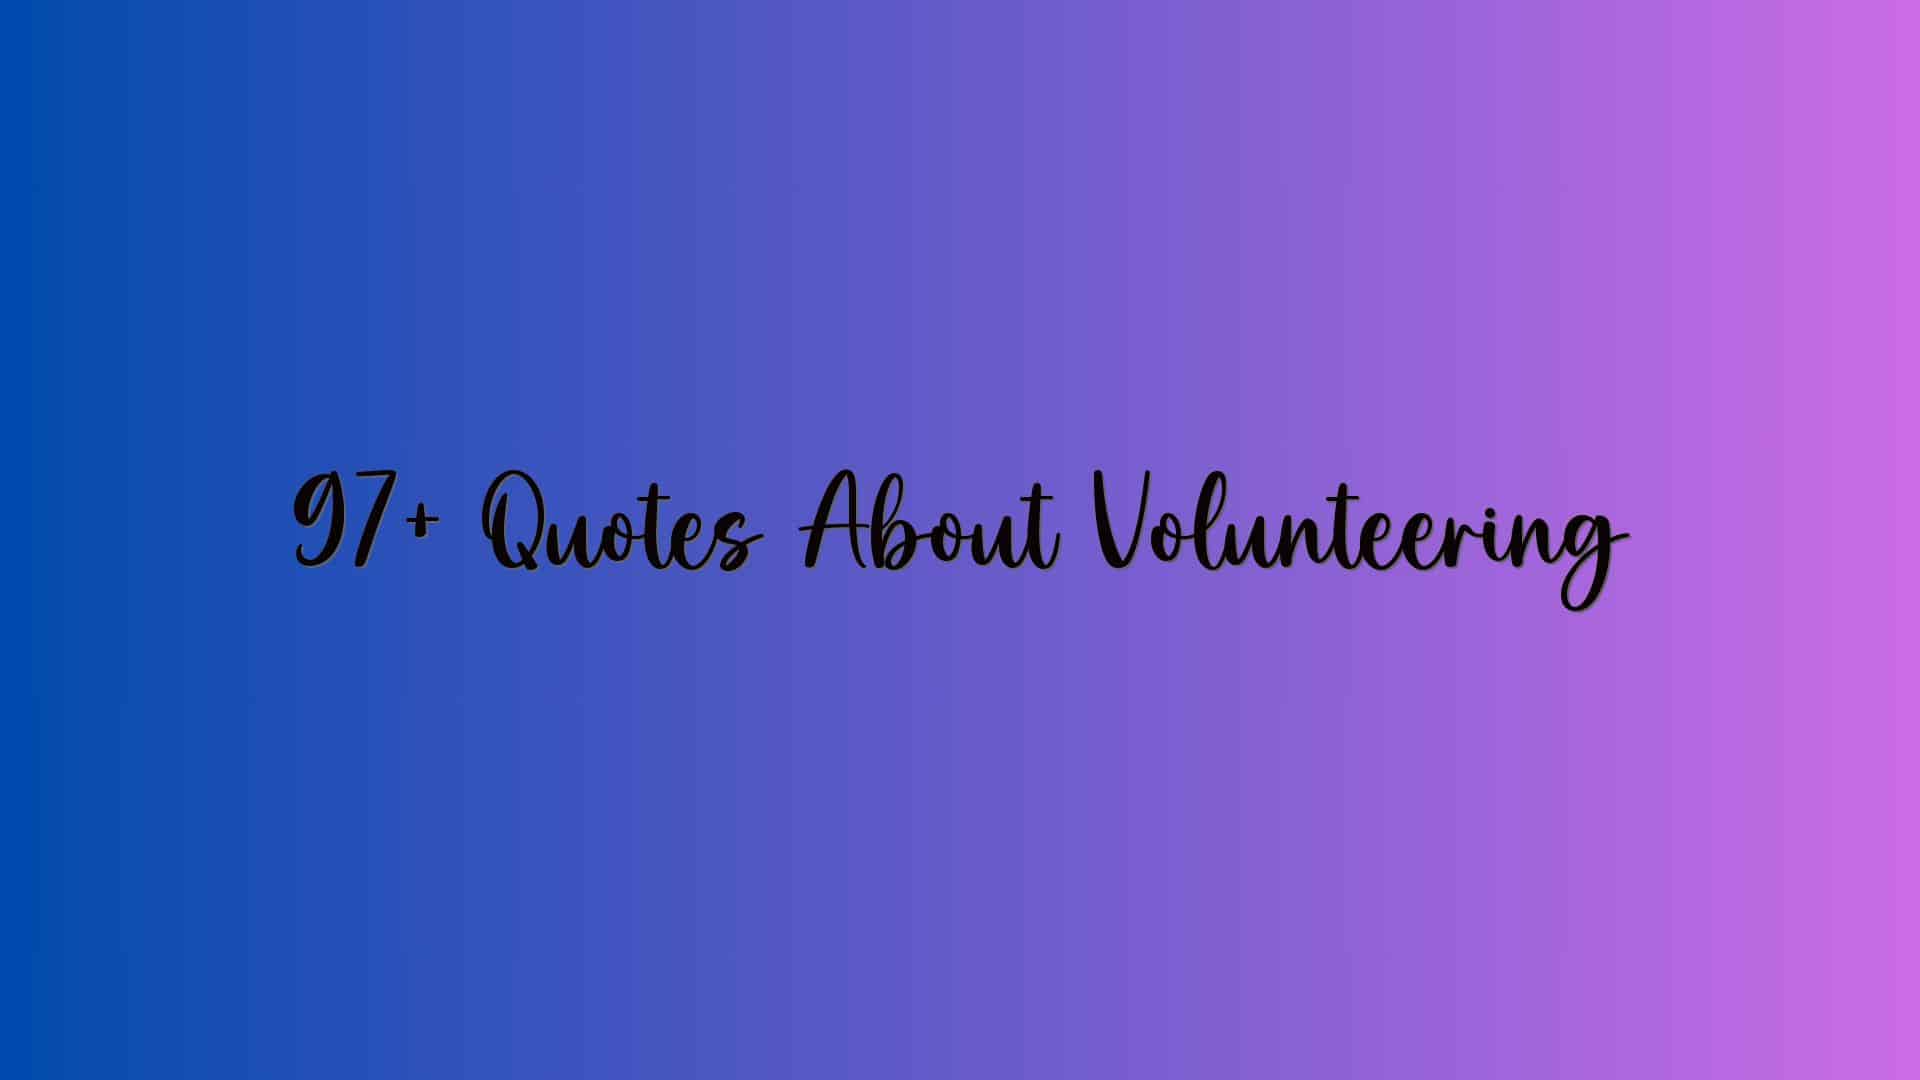 97+ Quotes About Volunteering